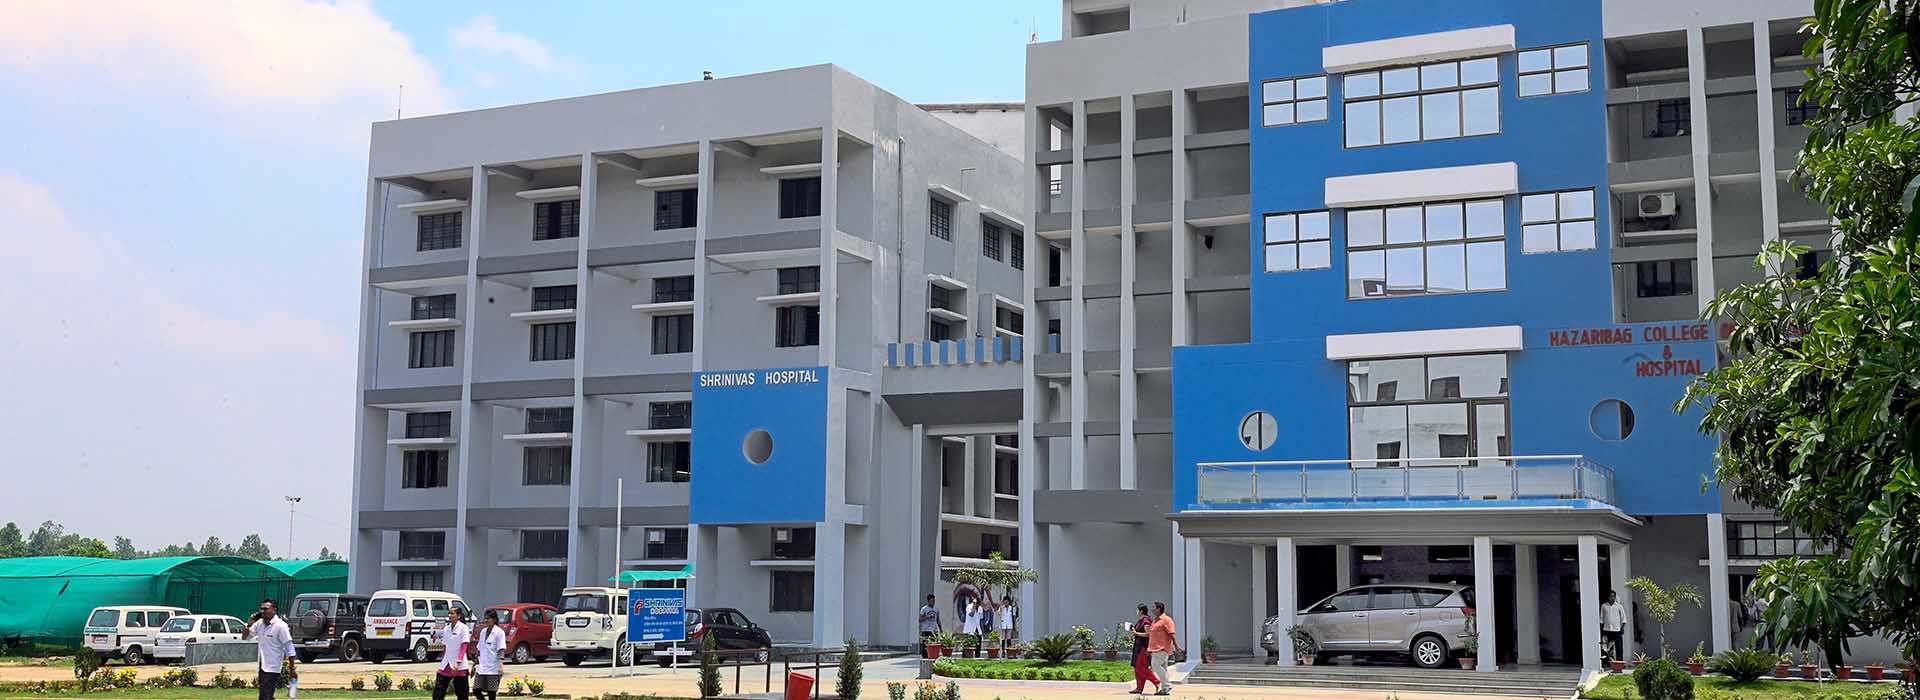 Hazaribagh Dental College Admission, Courses Offered, Fees structure, Placements, Facilities